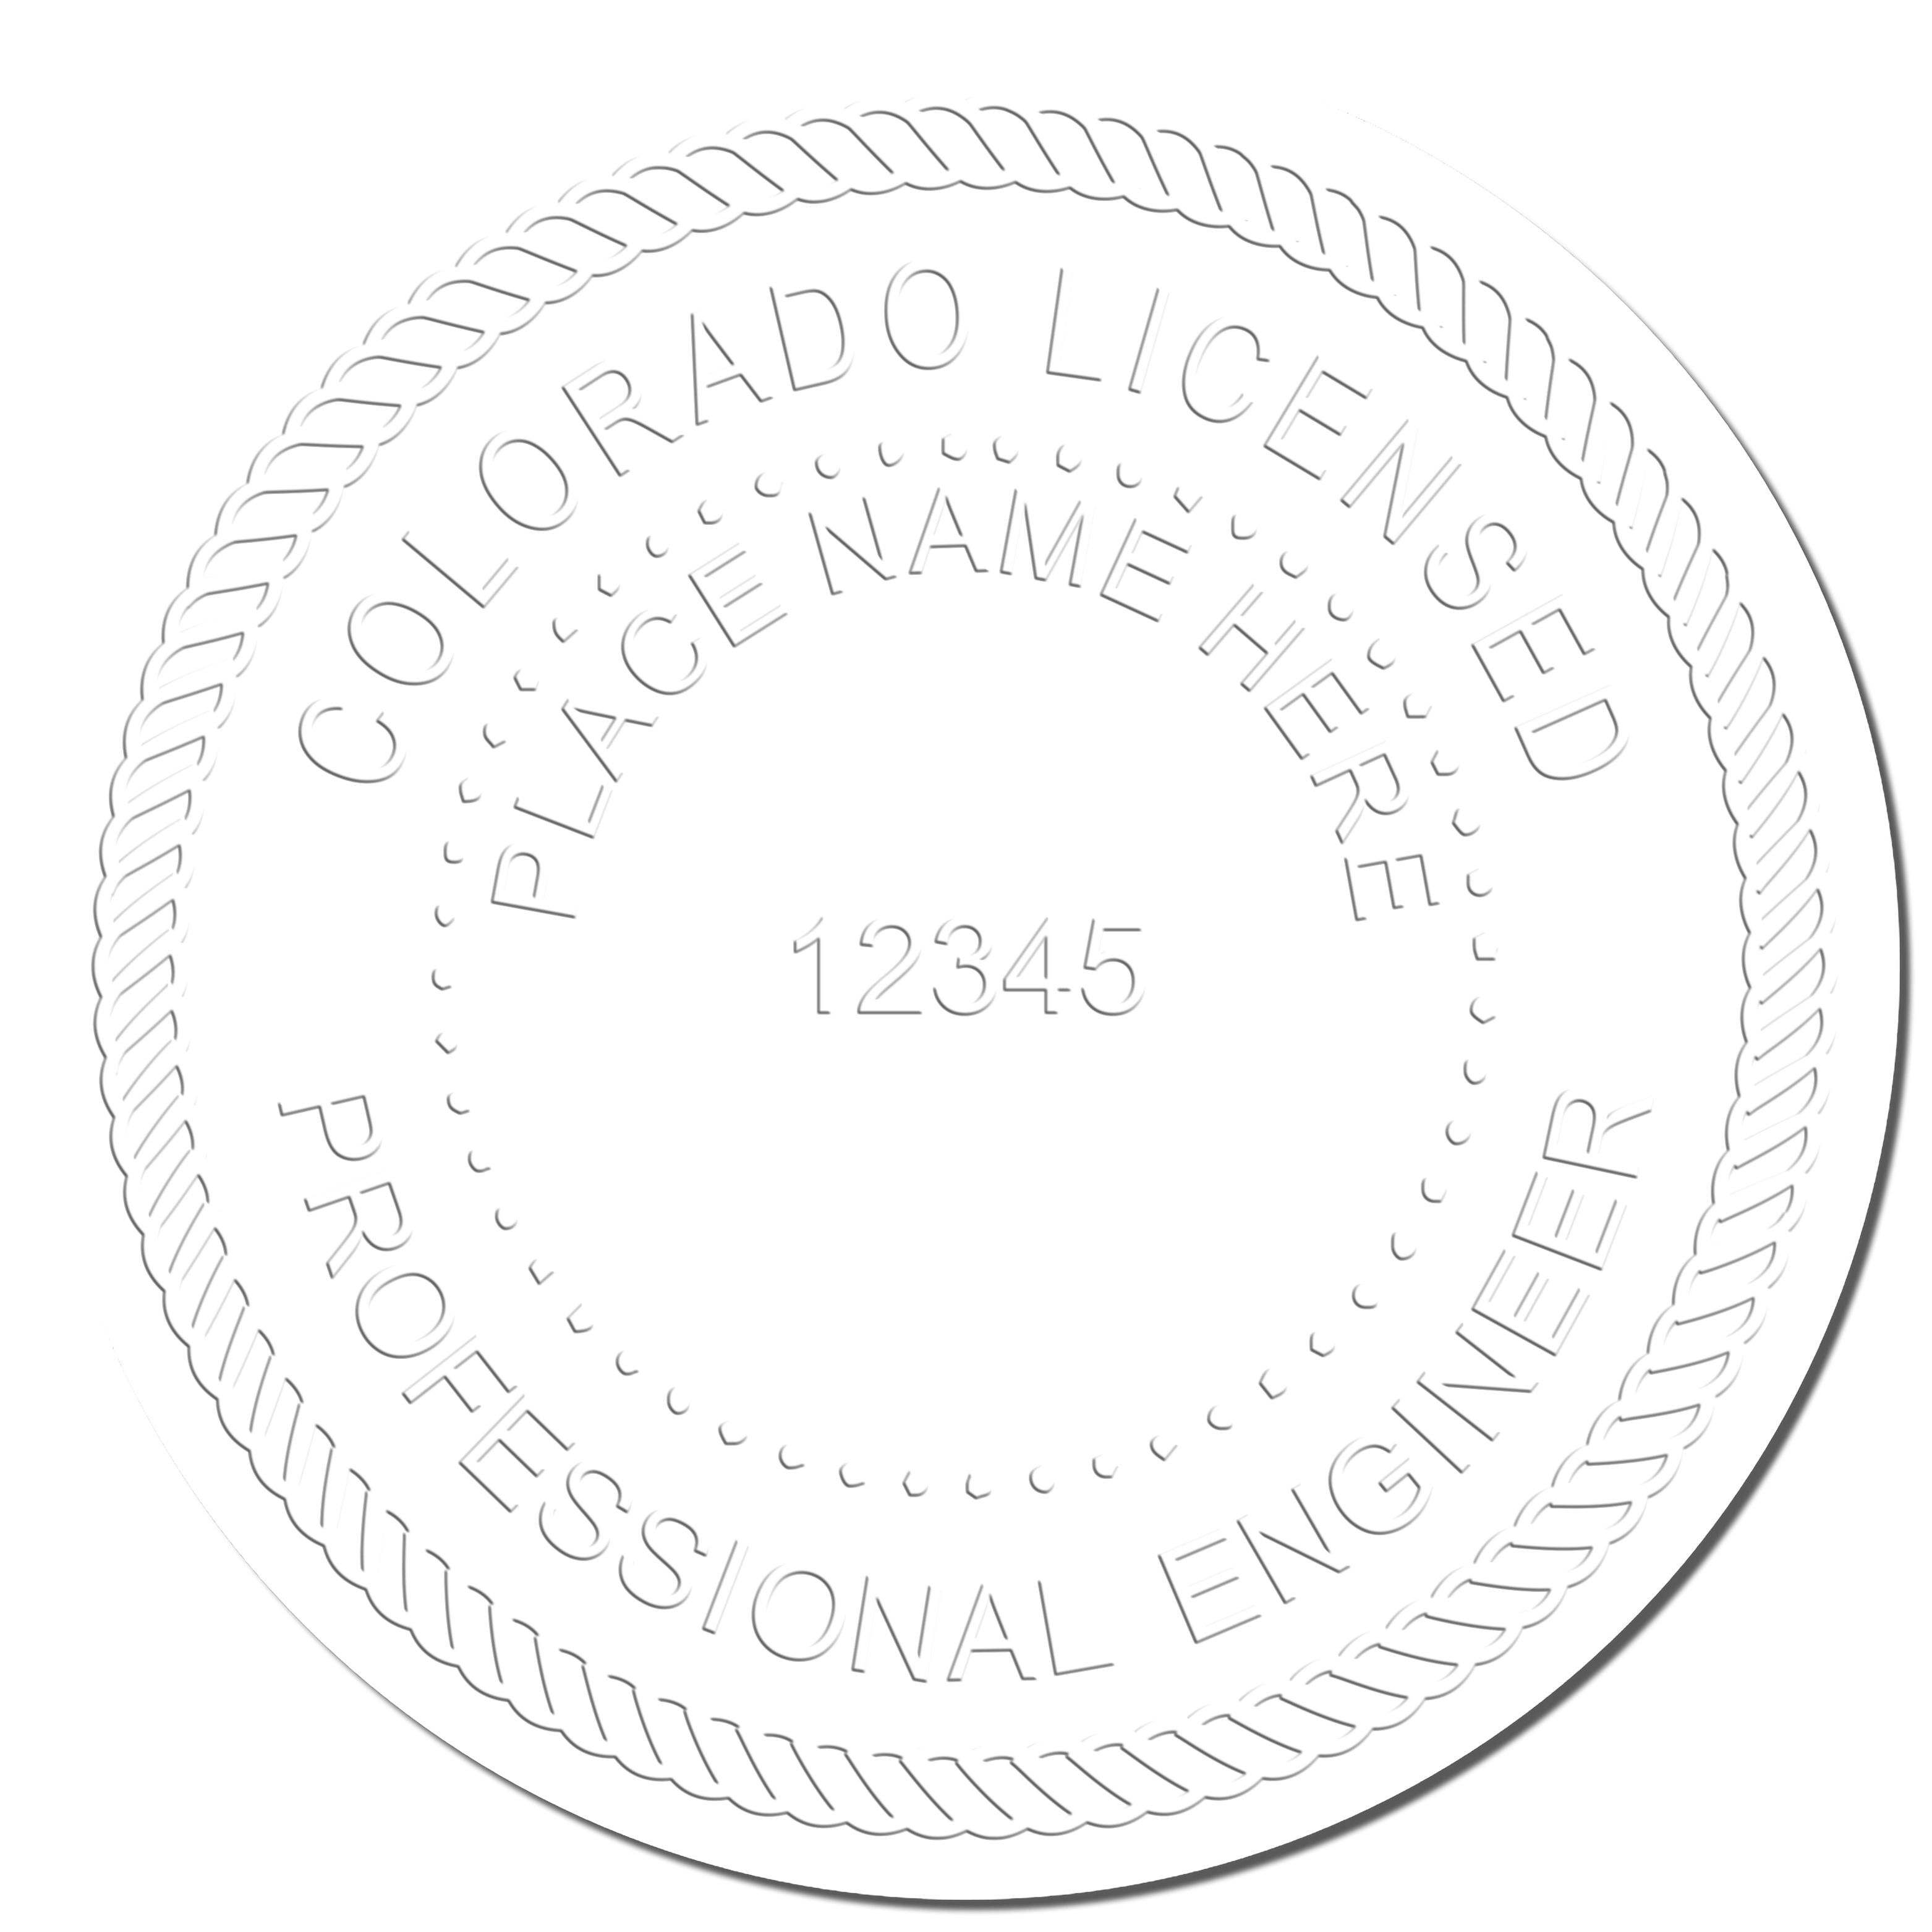 Another Example of a stamped impression of the Colorado Engineer Desk Seal on a piece of office paper.